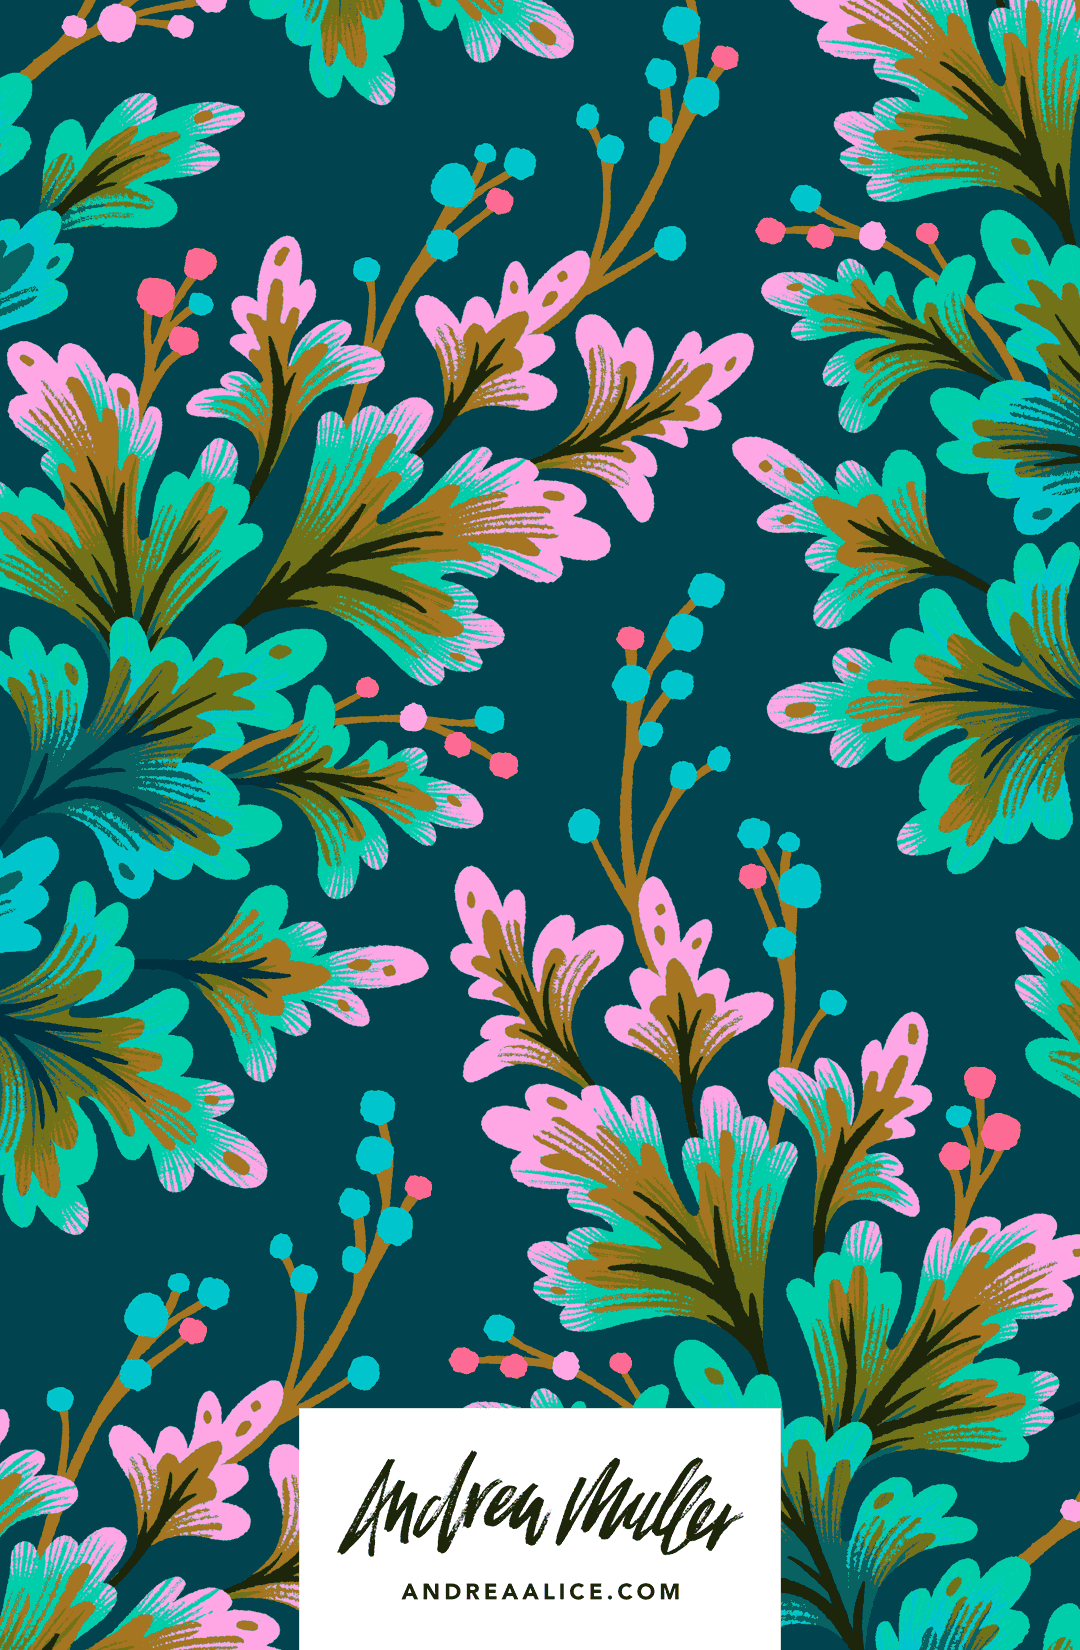 Scalloped frilly leaf foliage repeat pattern illustration green and pink by Andrea Muller